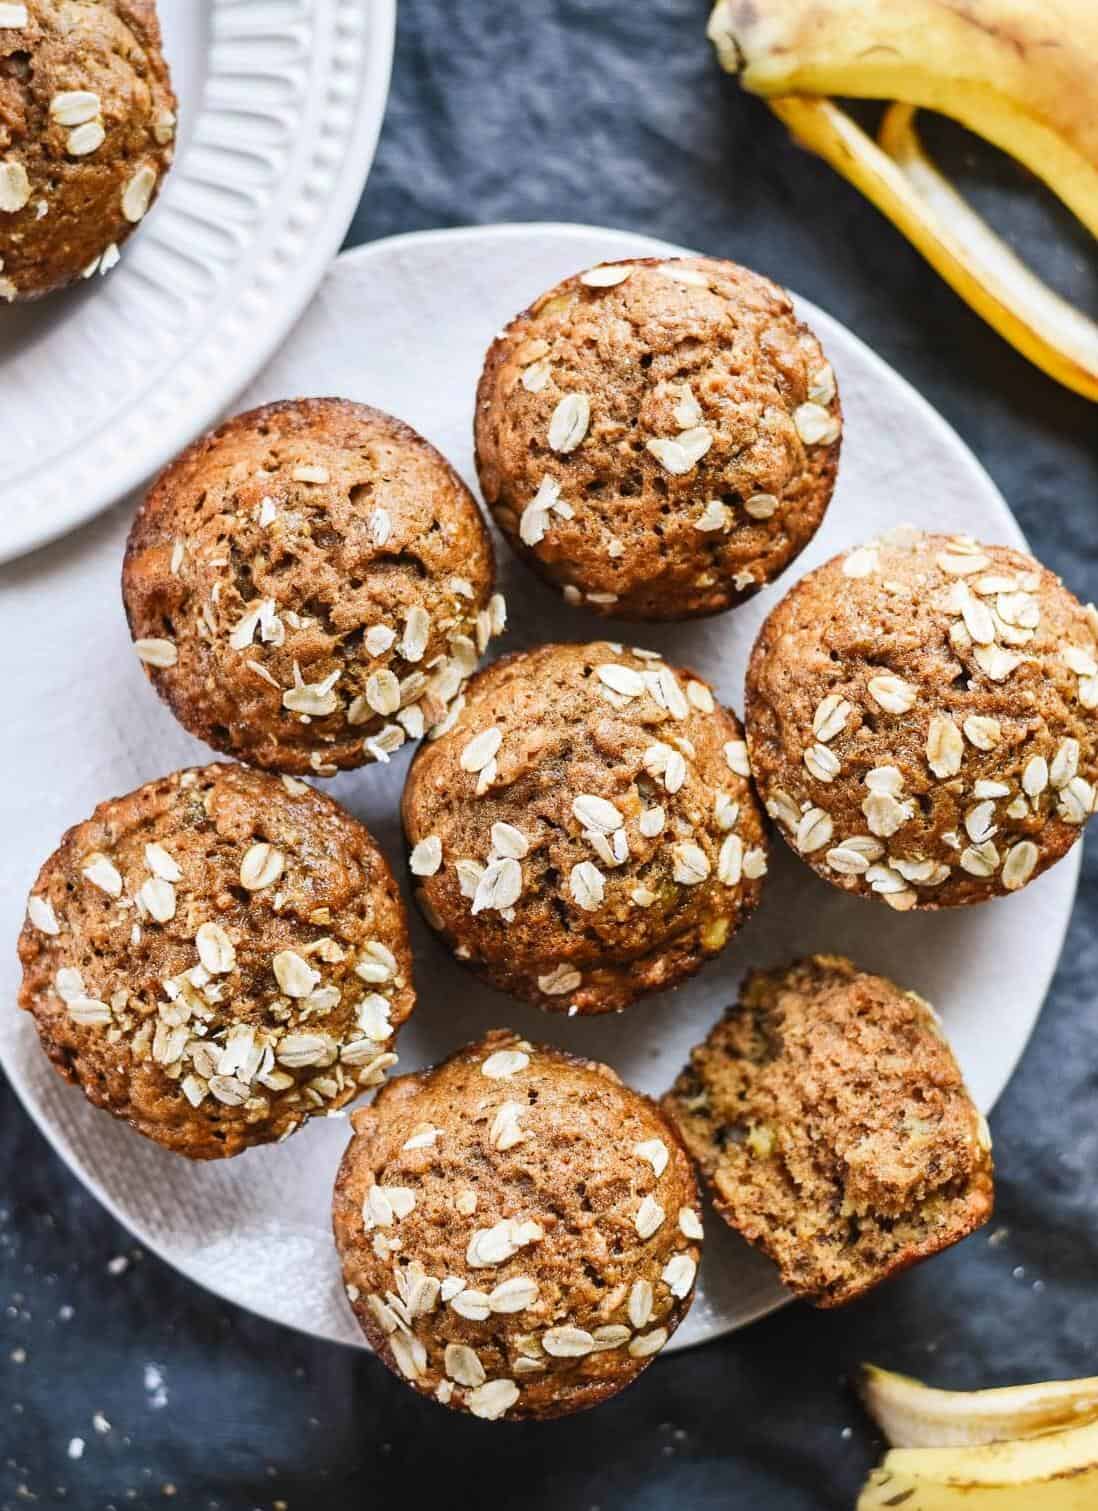  These muffins are perfect for an on-the-go breakfast or a midday snack.